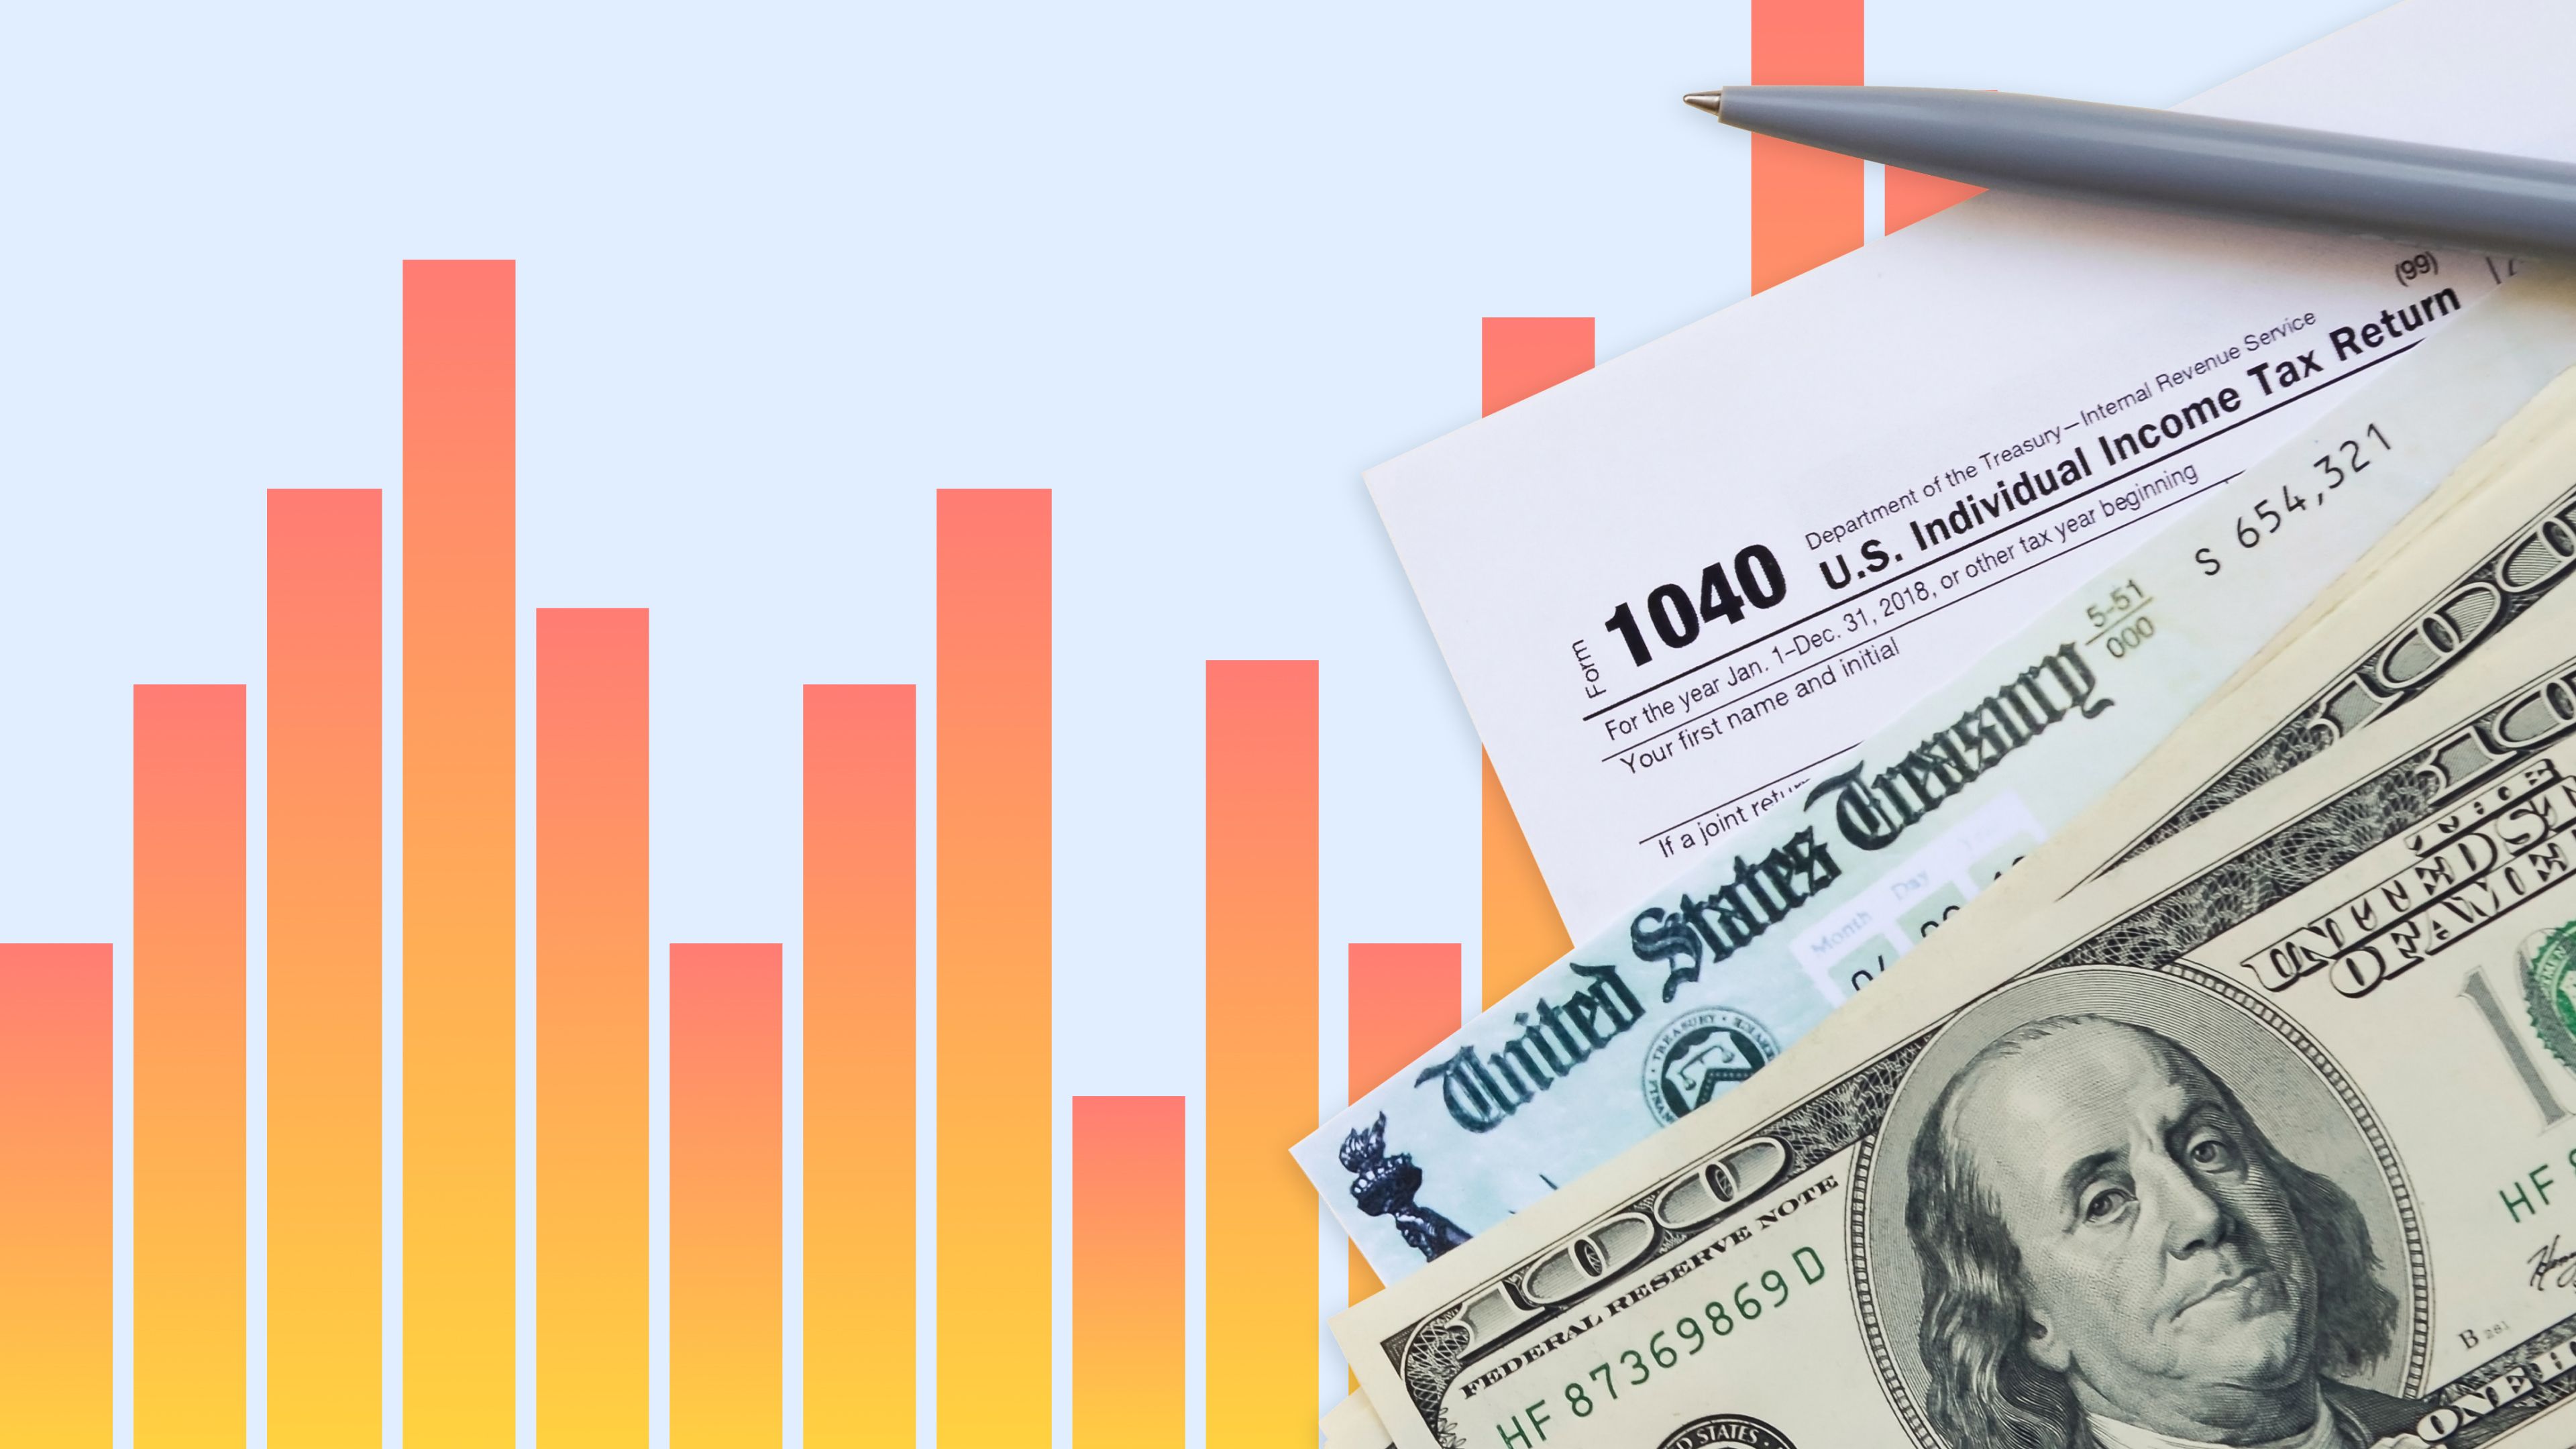 Composite image of a shaded orange bar graph, pen, tax paperwork, treasury bond and cash.